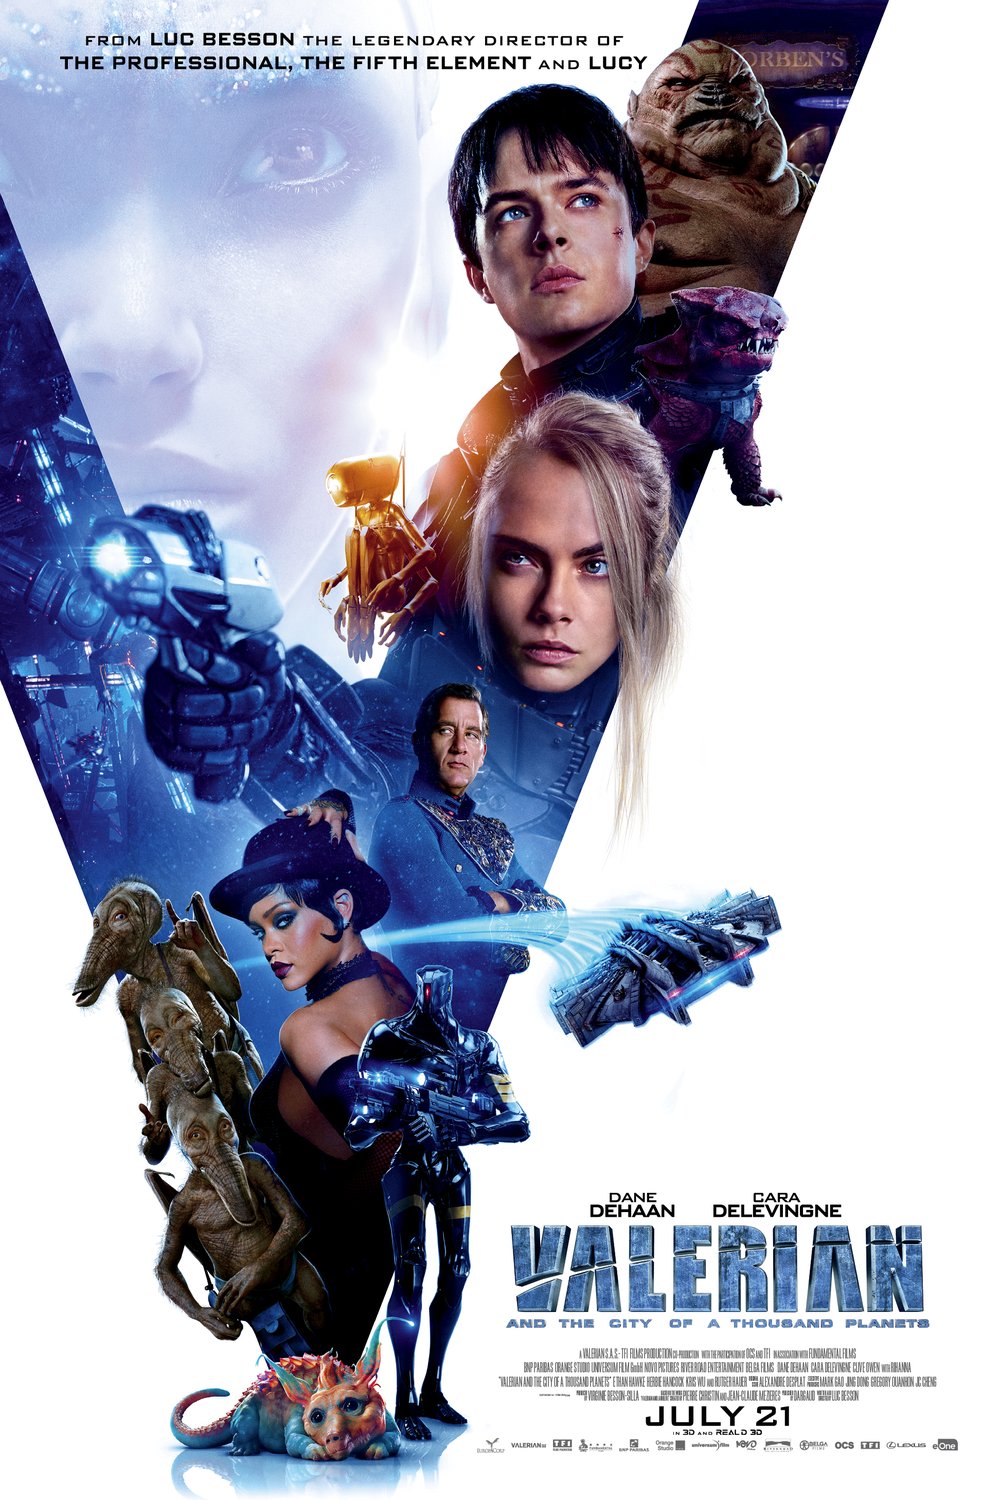 L'affiche du film Valerian and the City of a Thousand Planets